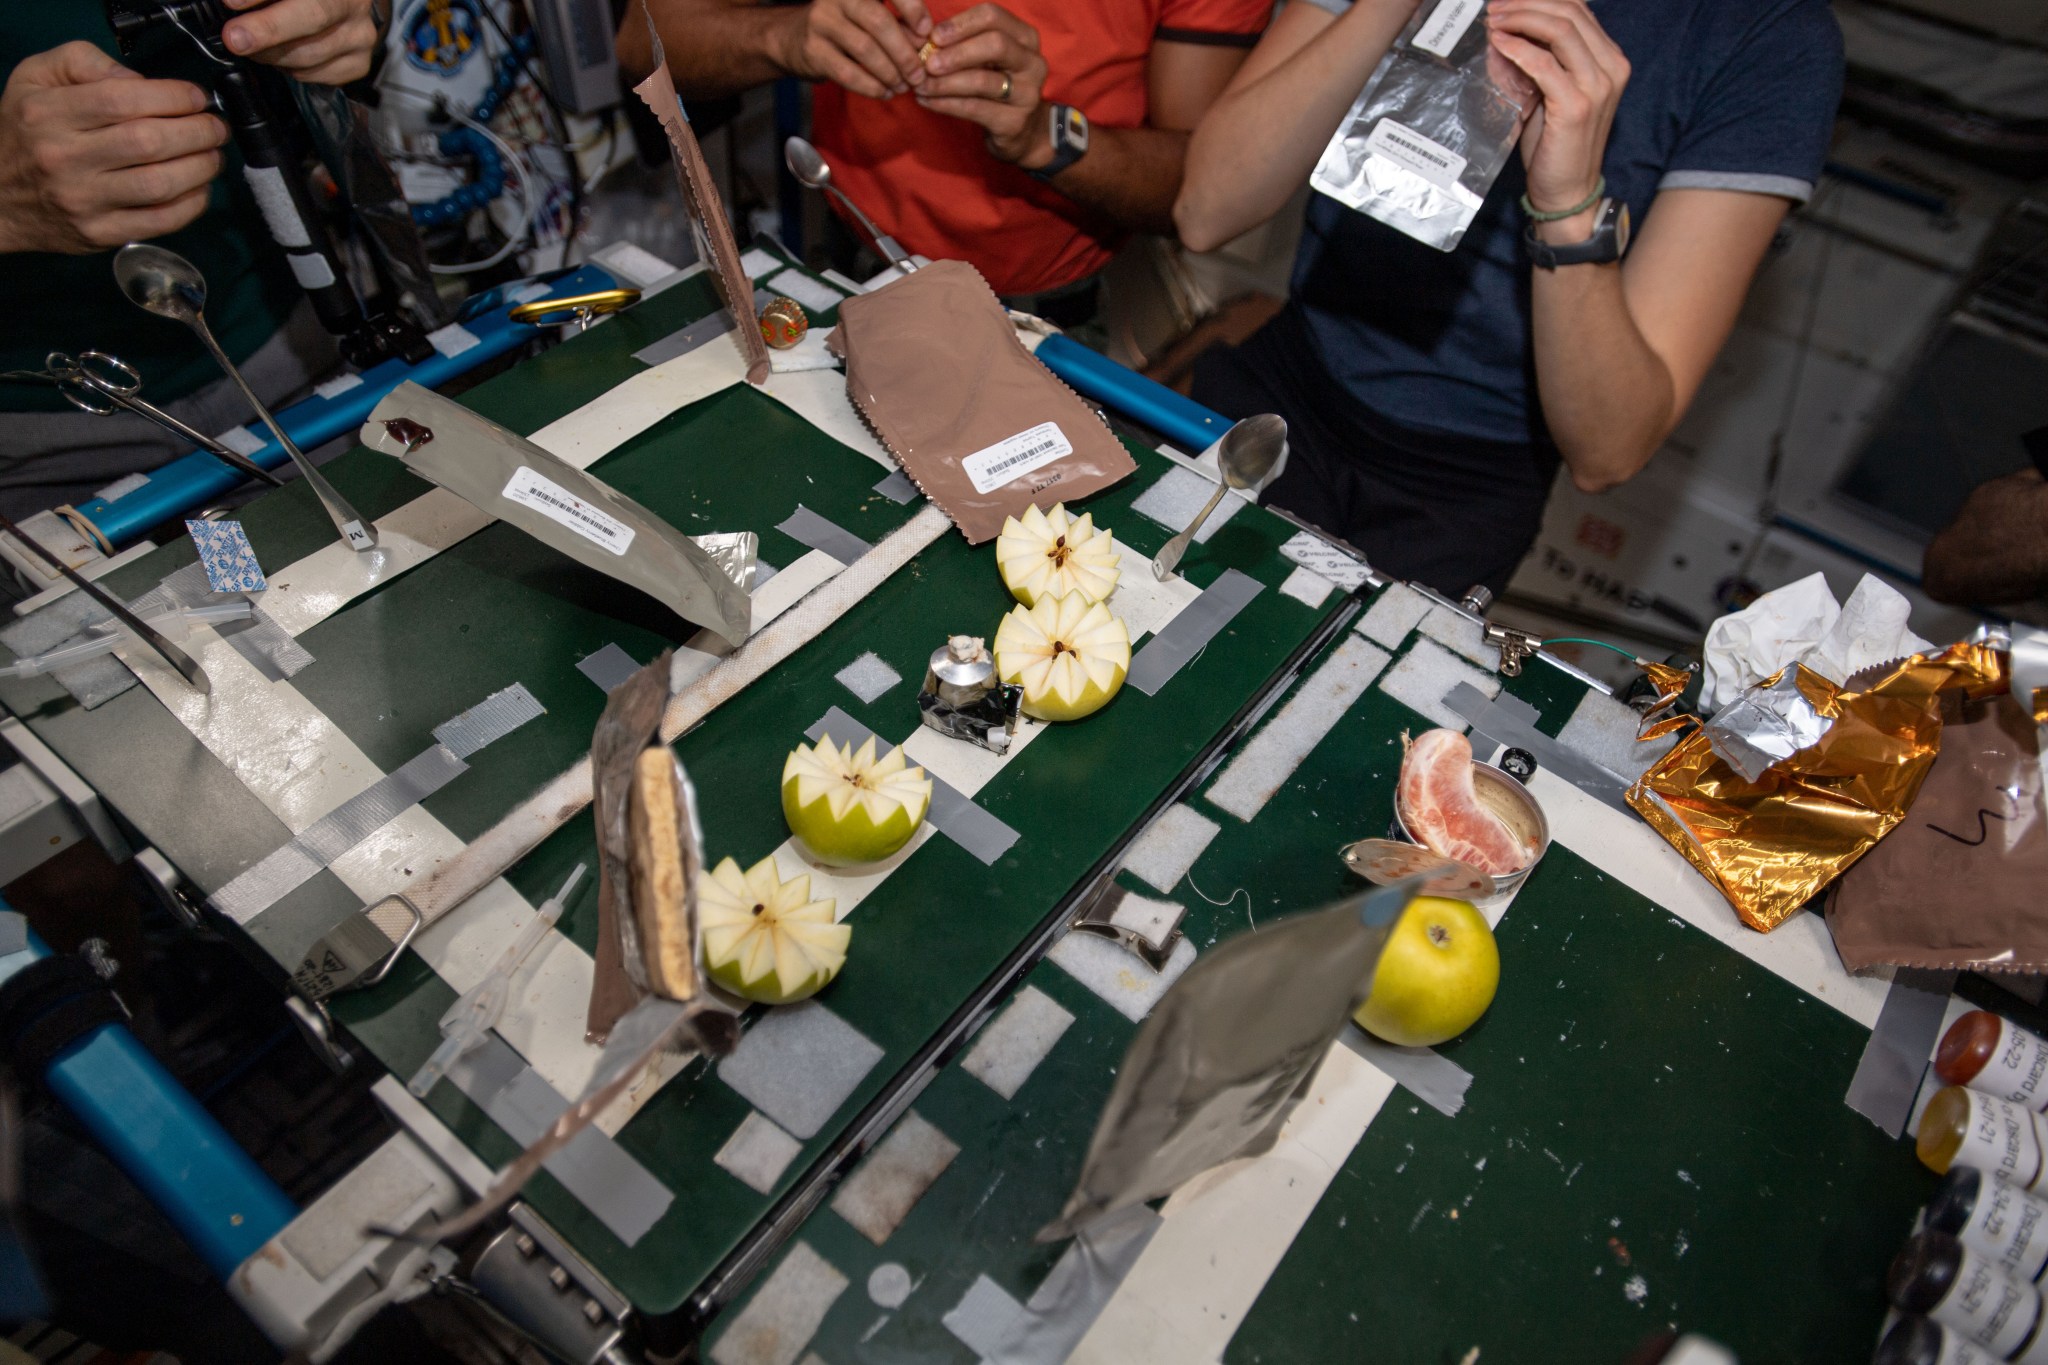 image of apples on the crew's meal table in station